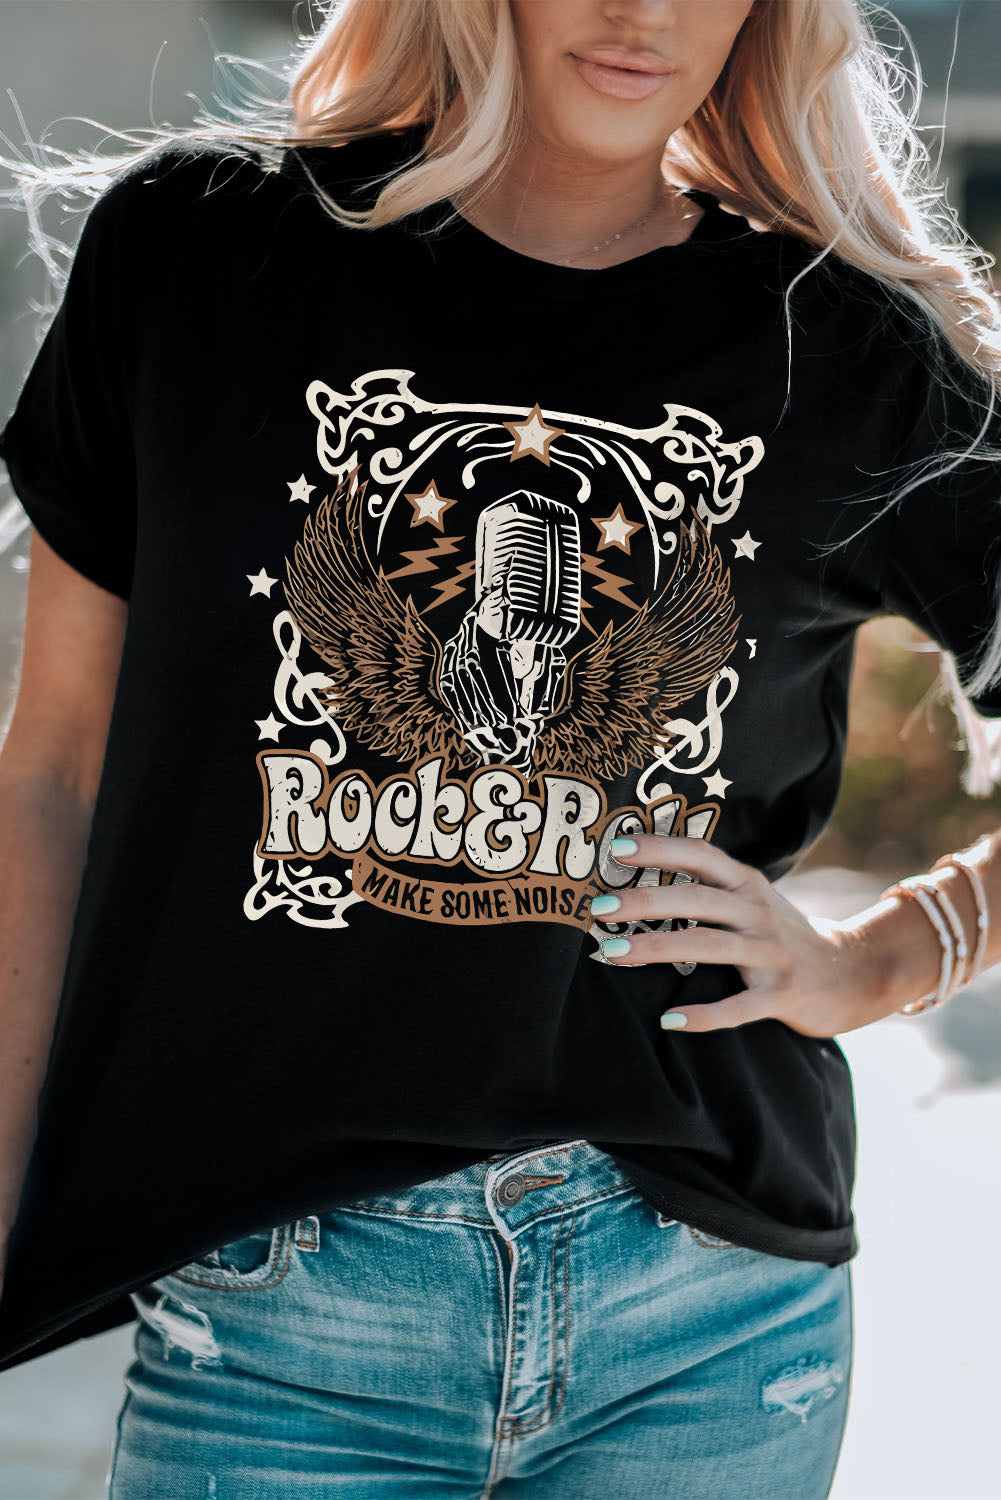 ROCK & ROLL LET'S MAKE SOME NOISE Graphic Tee